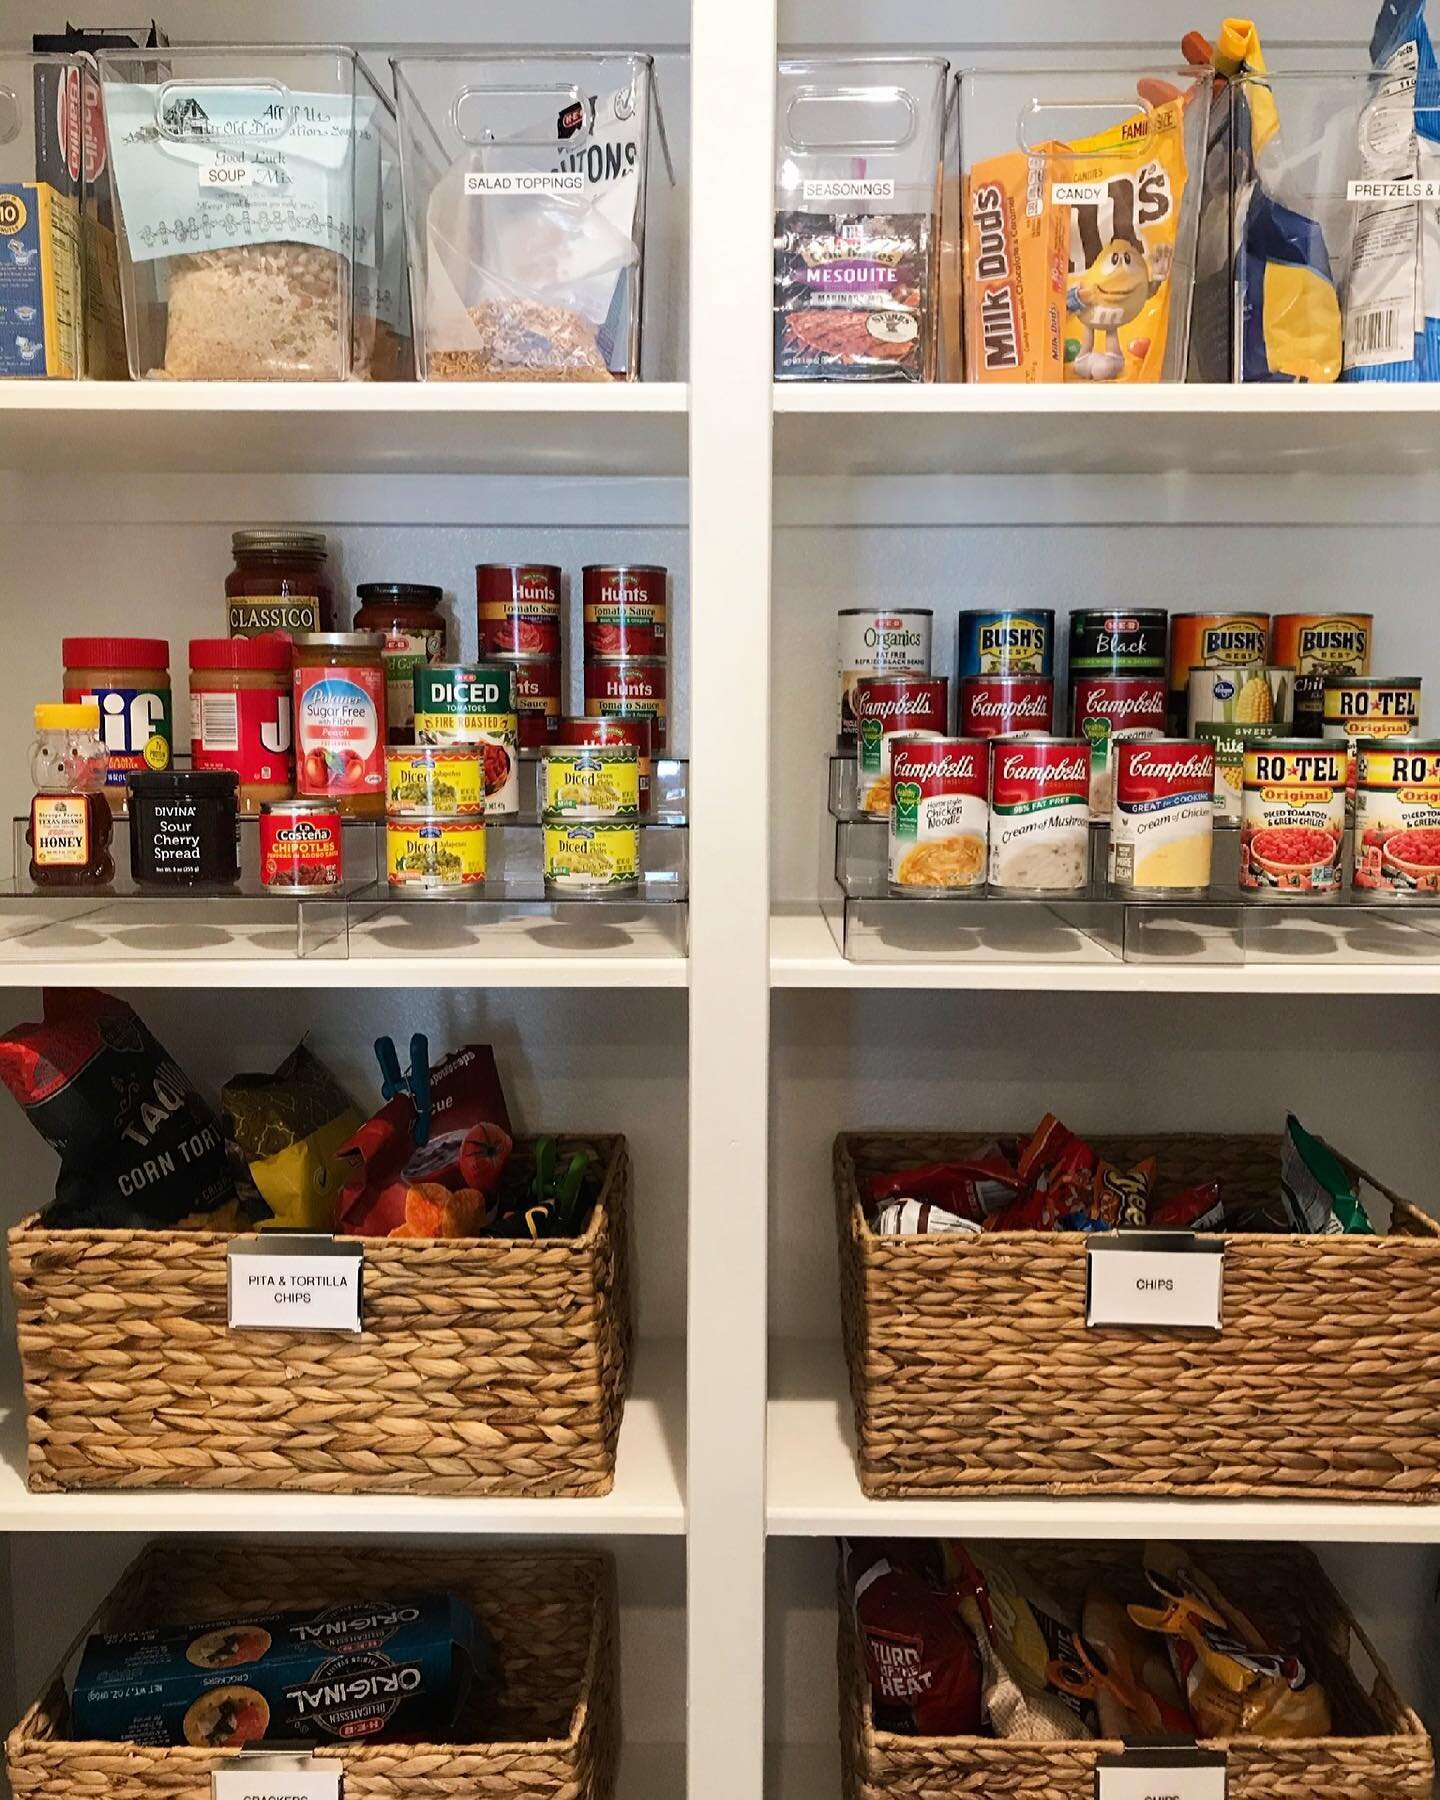 Simplify your Saturday with a well-stocked pantry! 
.
.
#pantry #pantryorganization #pantrygoals #pantrymakeover #crosswellorganizing